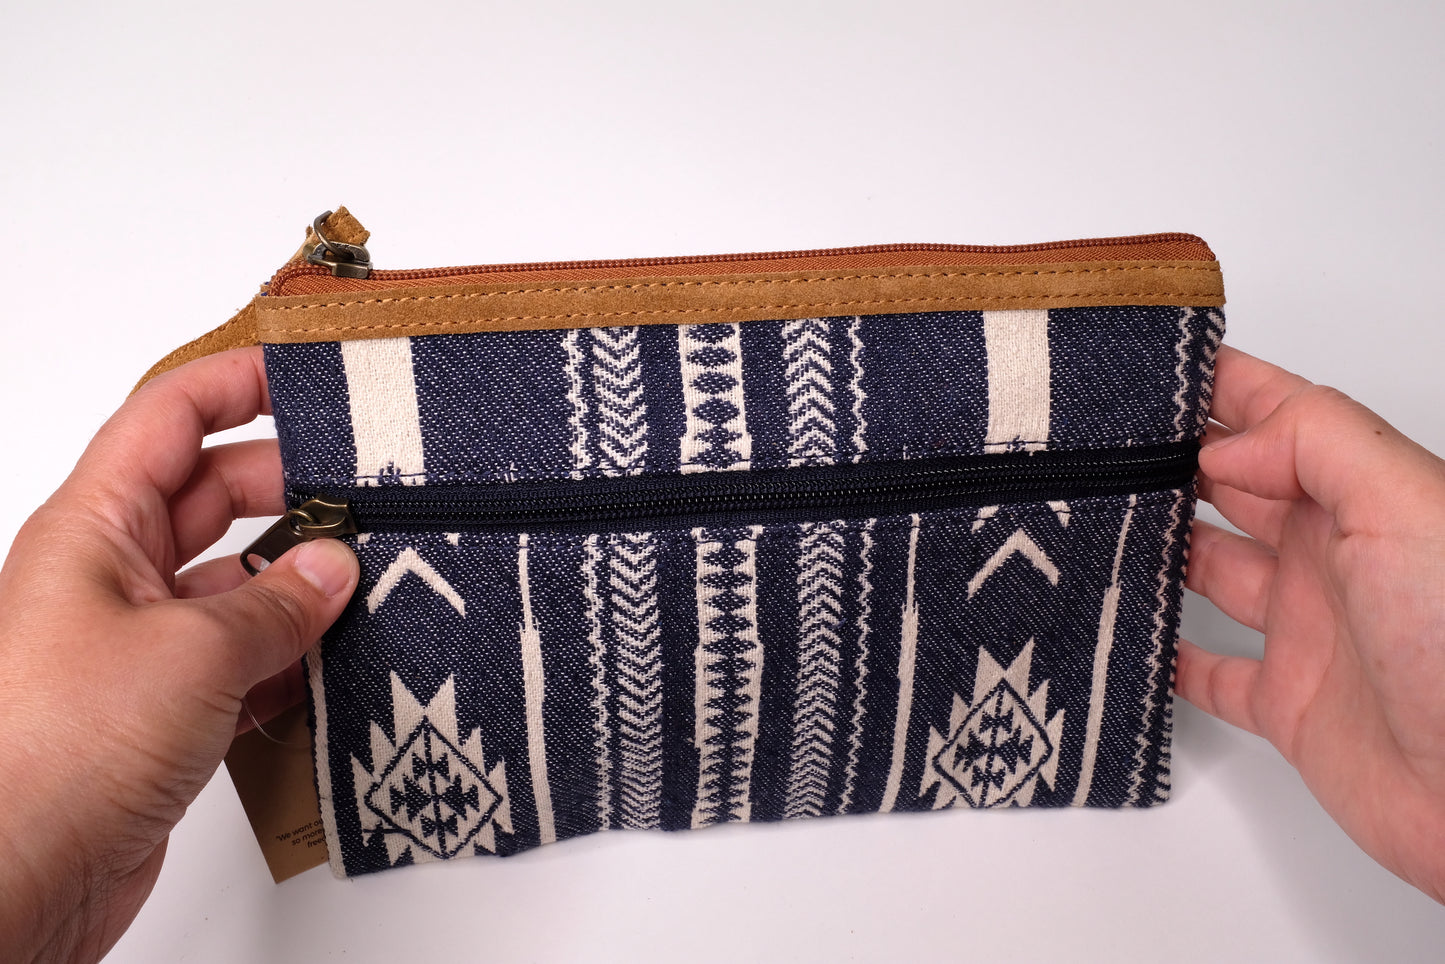 Clutch in blue made from cotton and suede.